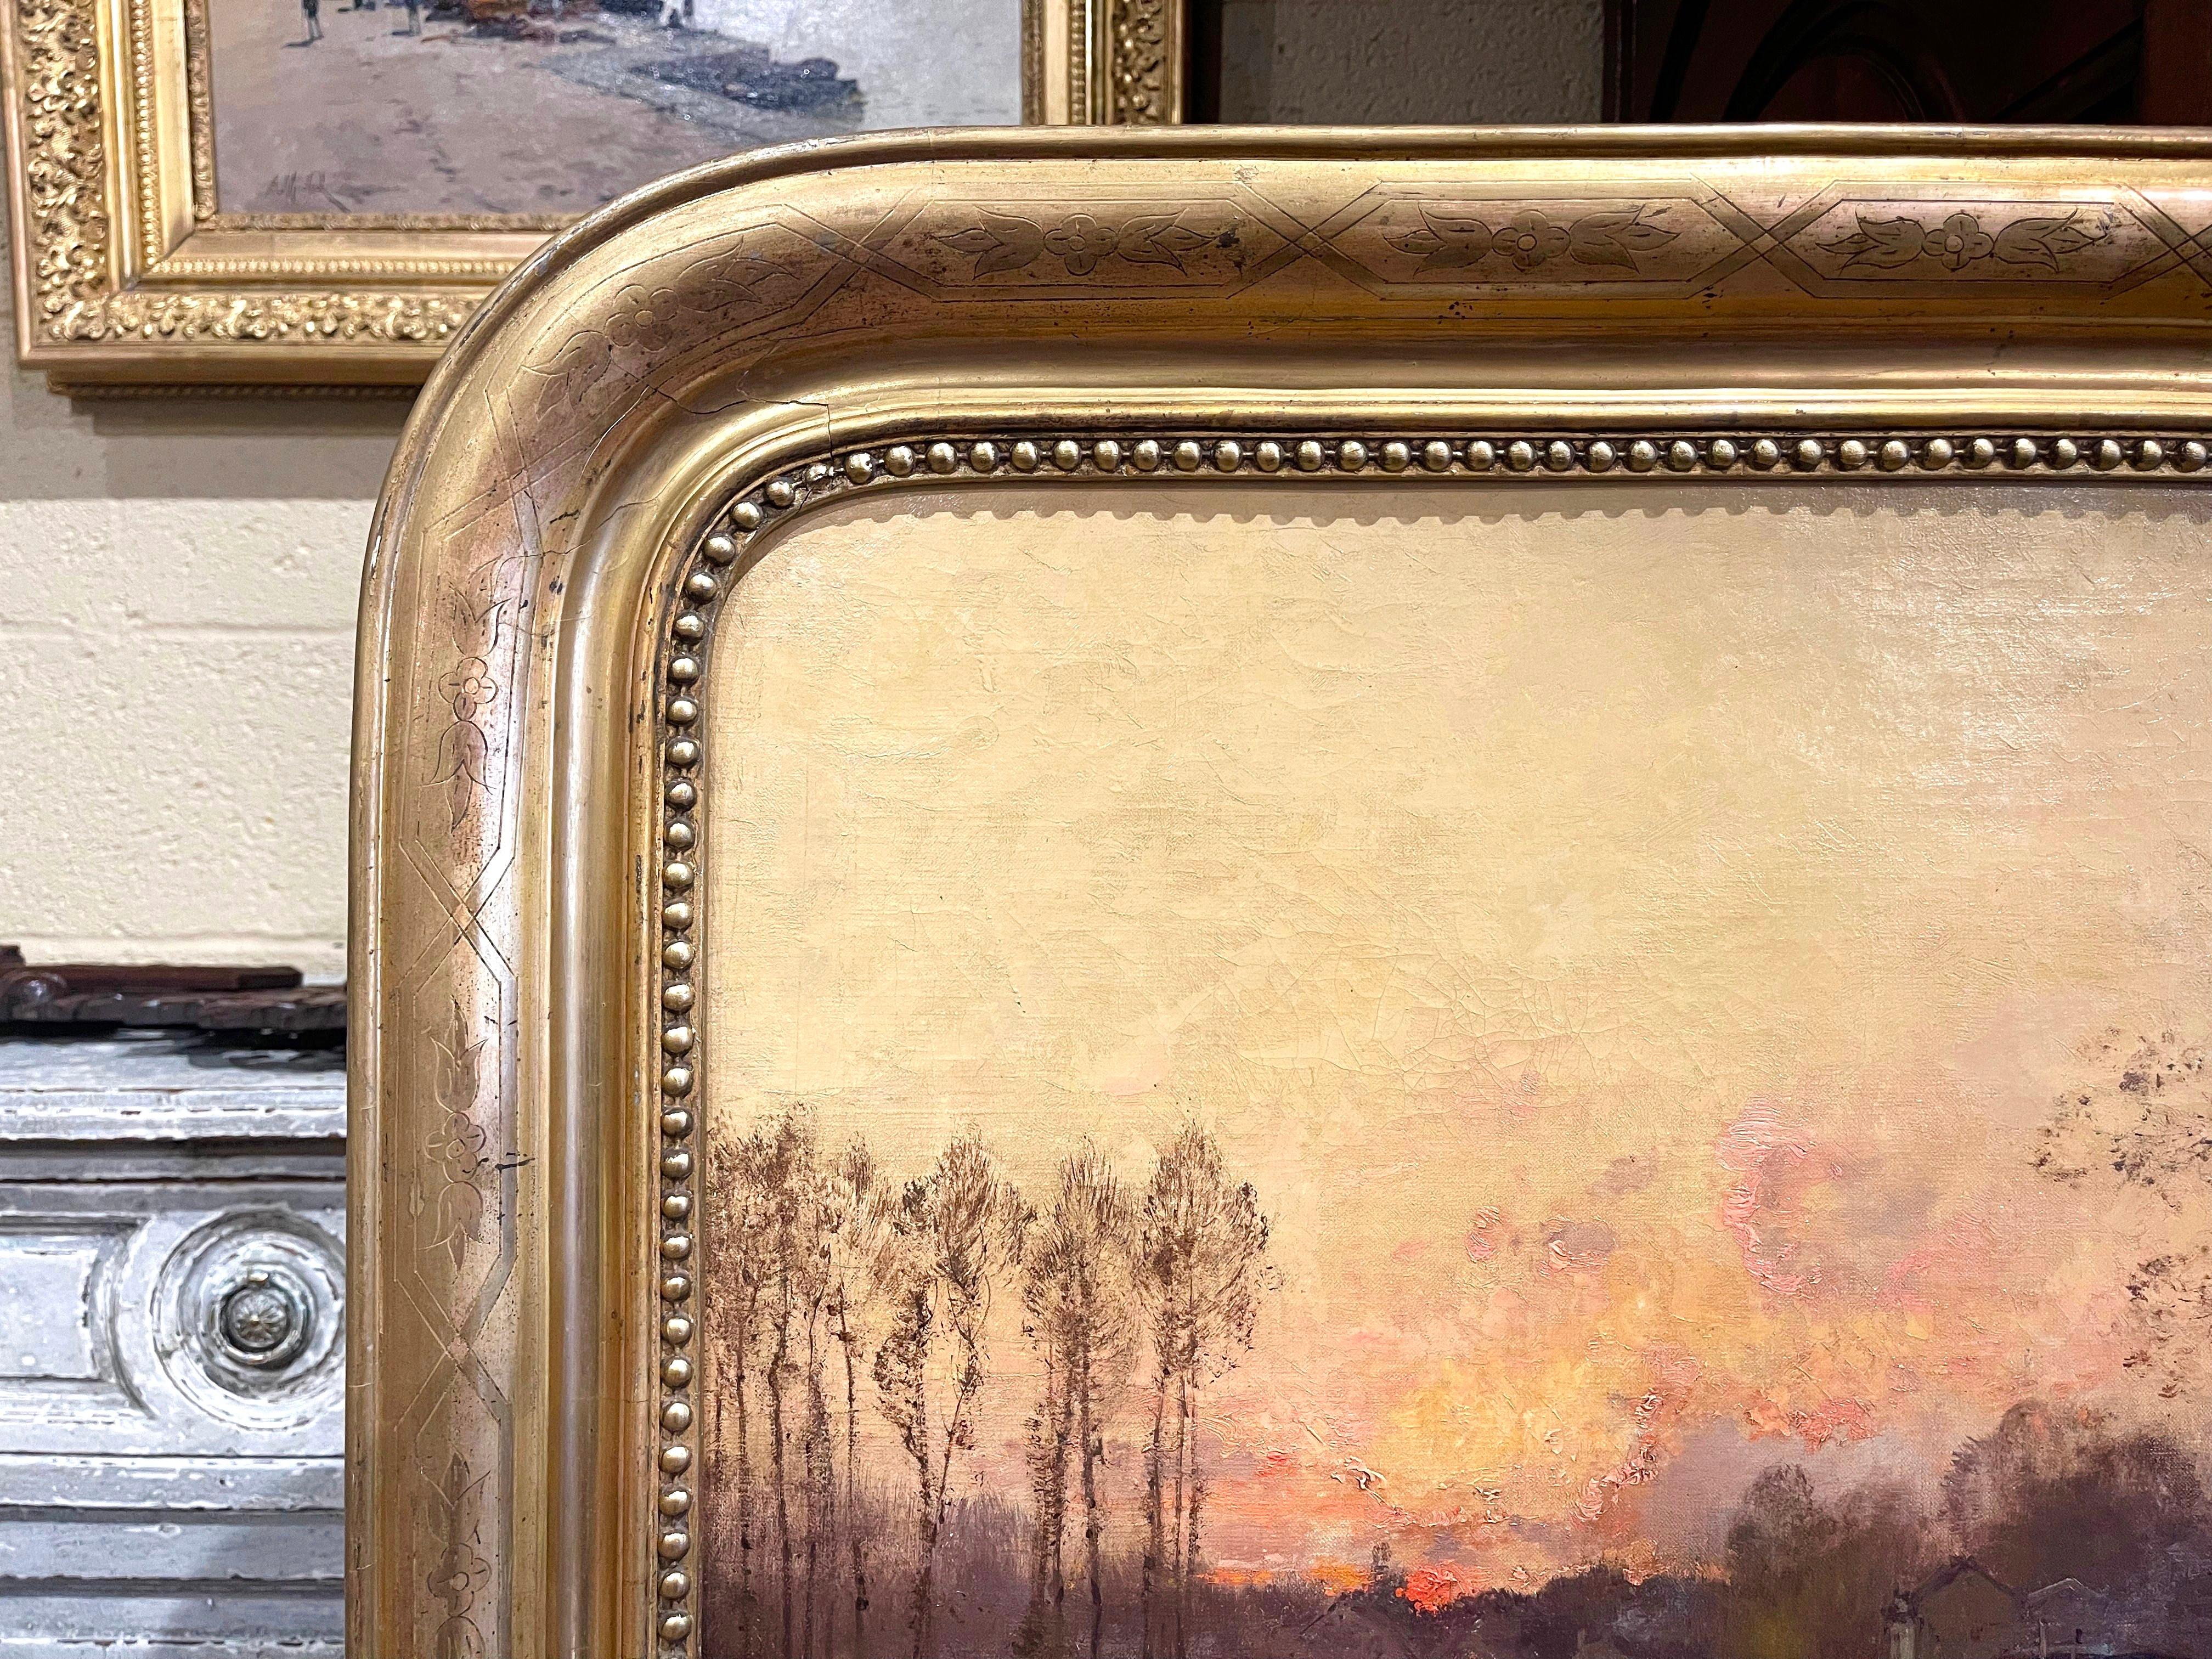 Giltwood 19th Century Framed Oil on Canvas Sunset Painting Signed E. Galien-Laloue